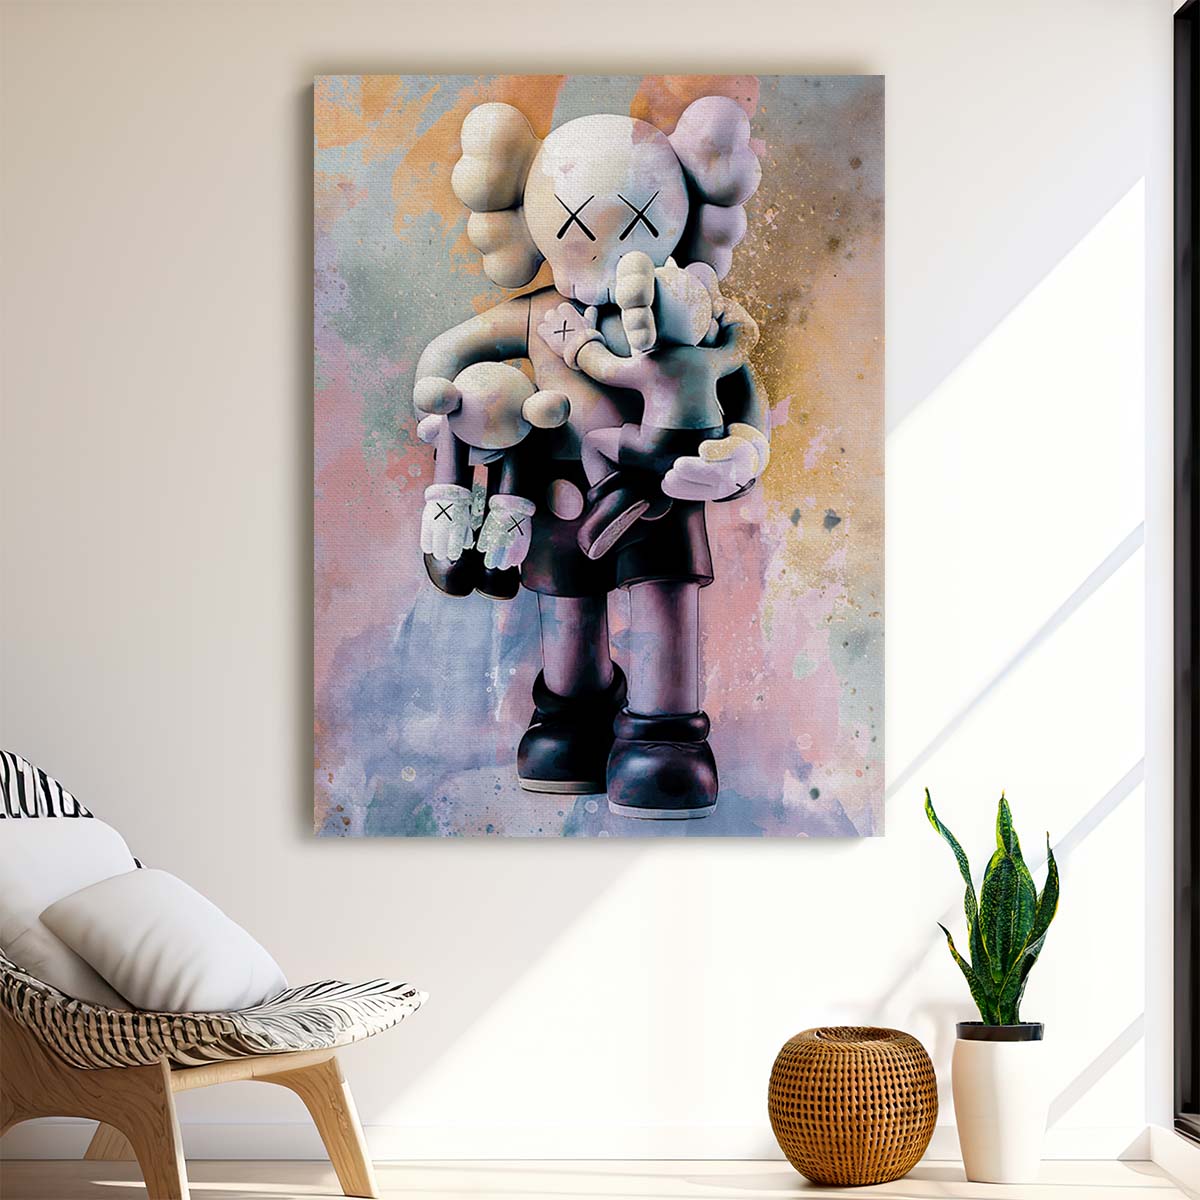 Kaws Family Wall Art by Luxuriance Designs. Made in USA.